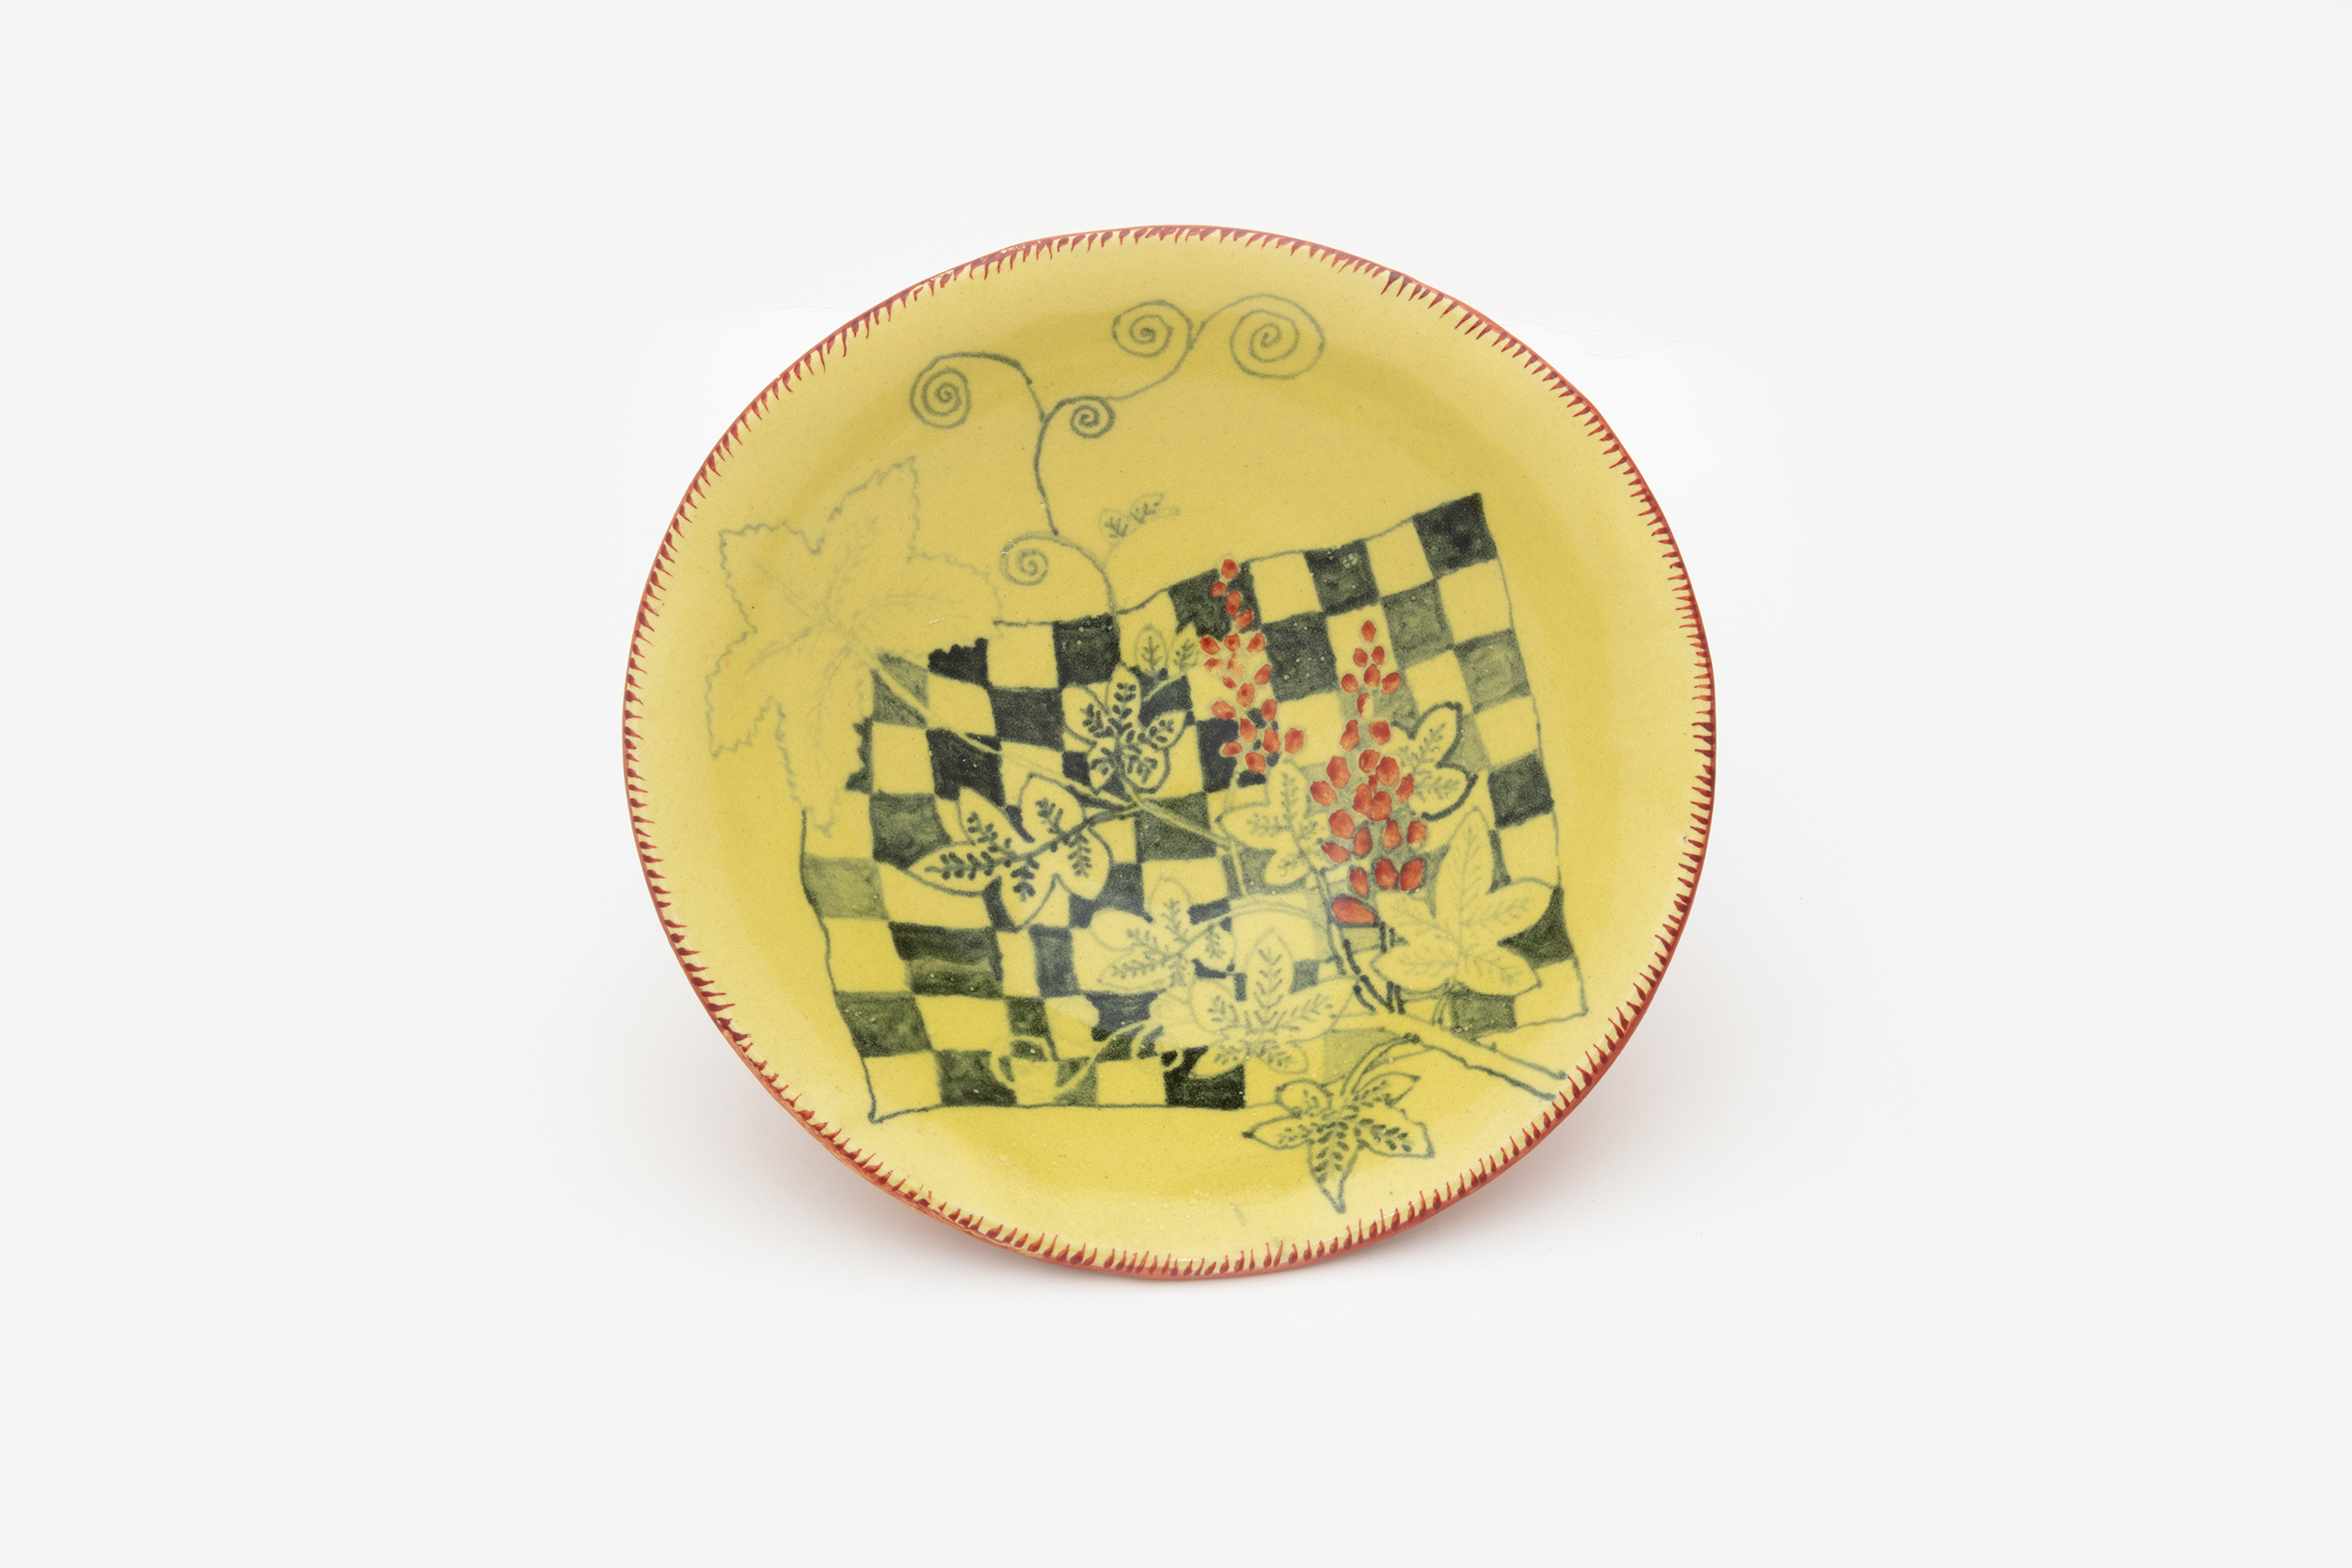 Hylton Nel - Yellow bowl with floral motifs, 13 May 2018